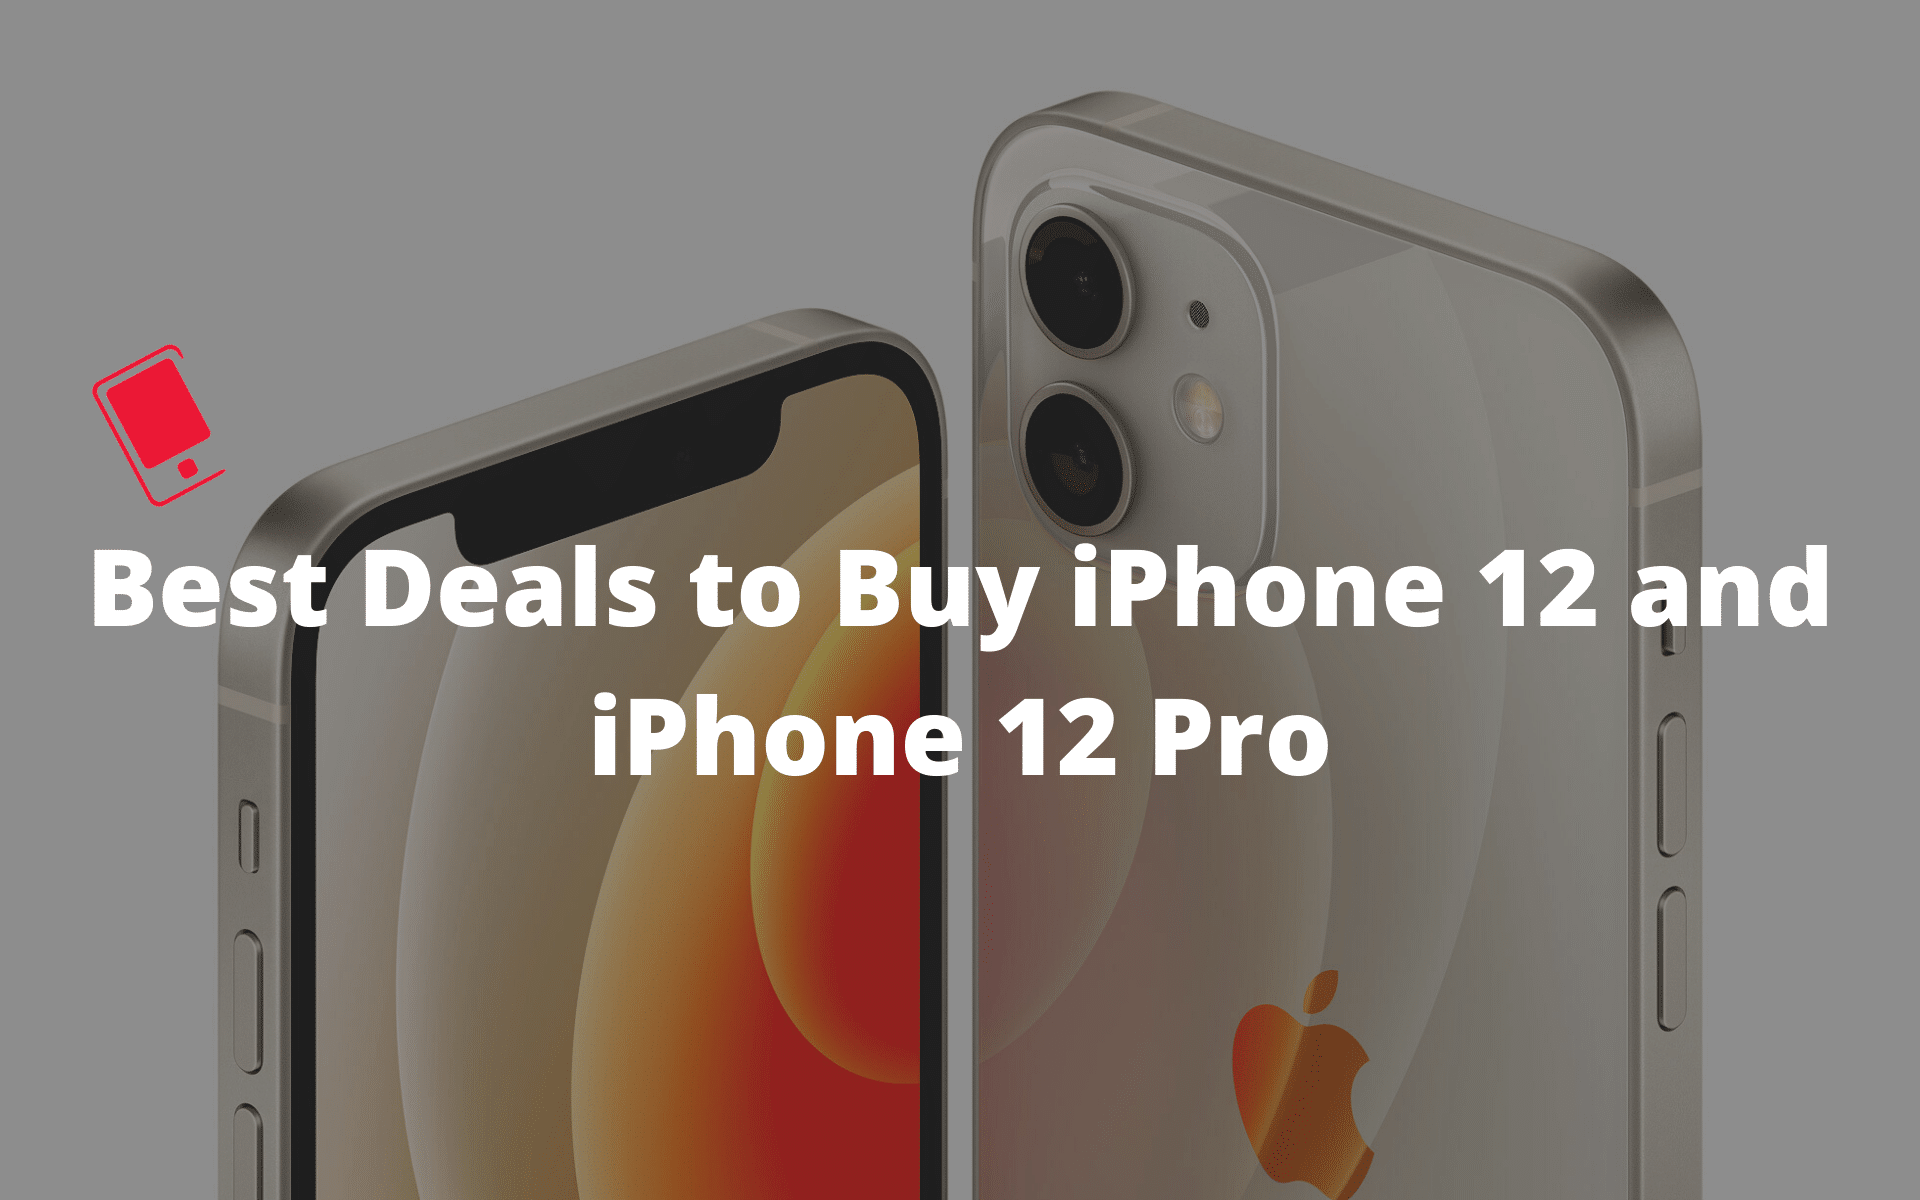 iPhone 12 and iPhone 12 Pro deals